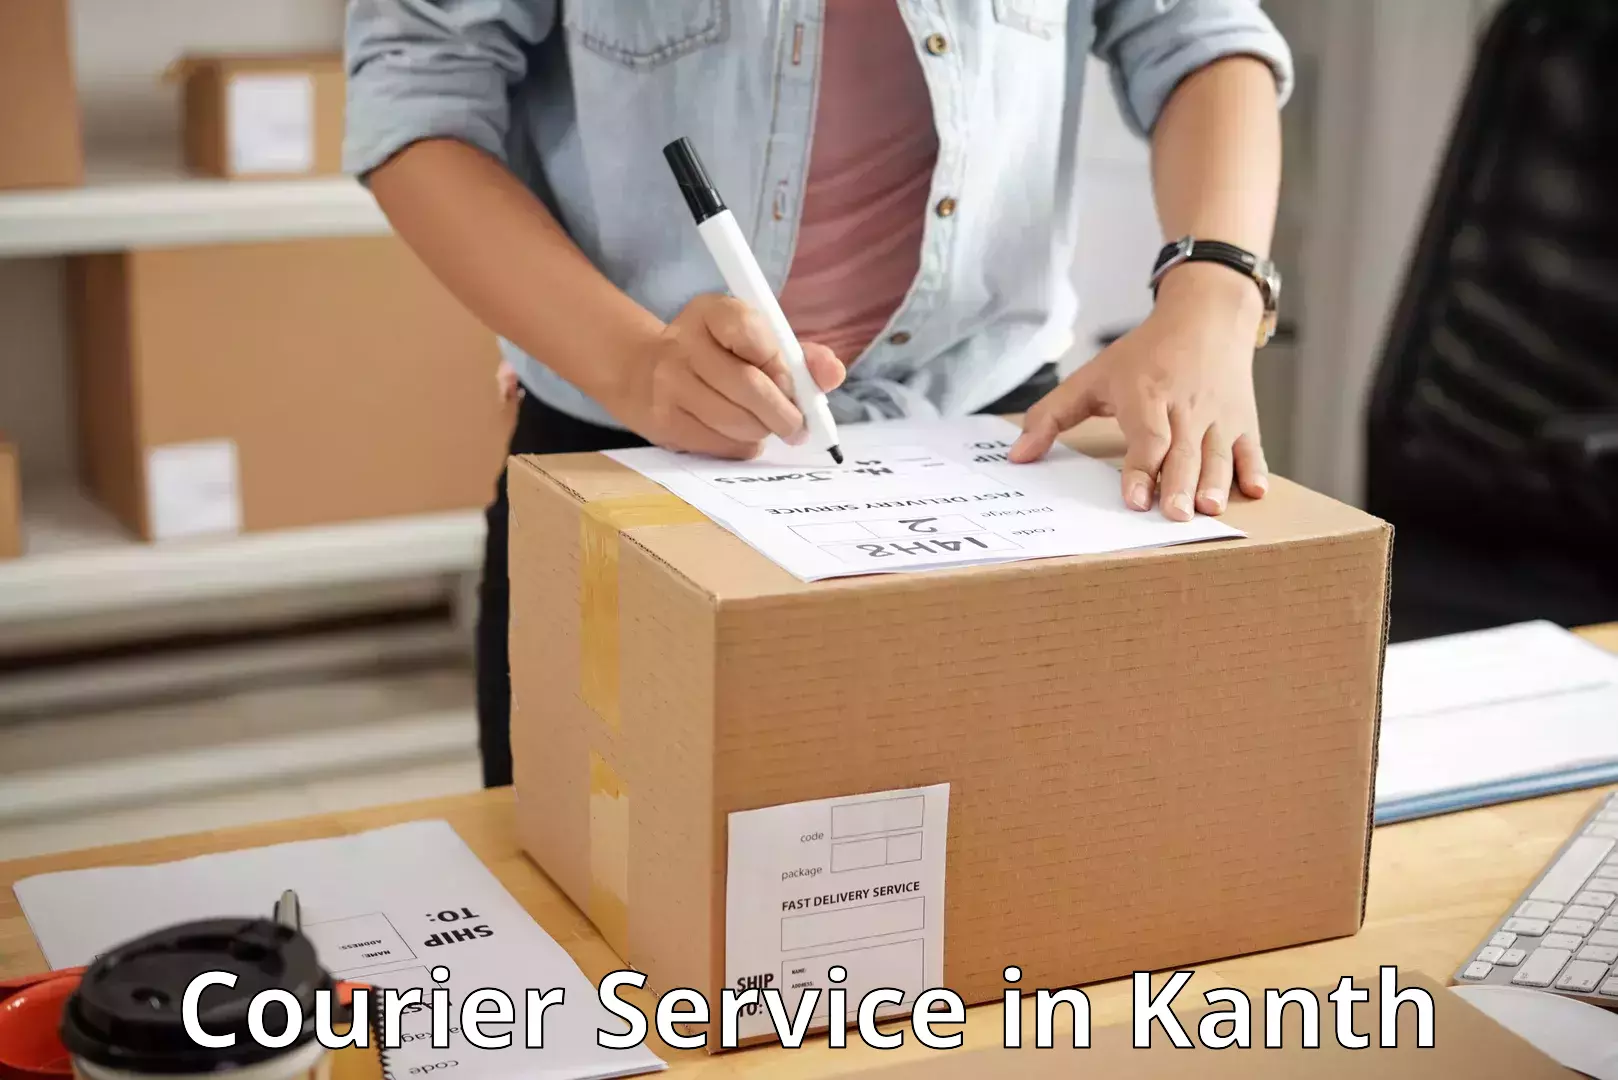 Round-the-clock parcel delivery in Kanth